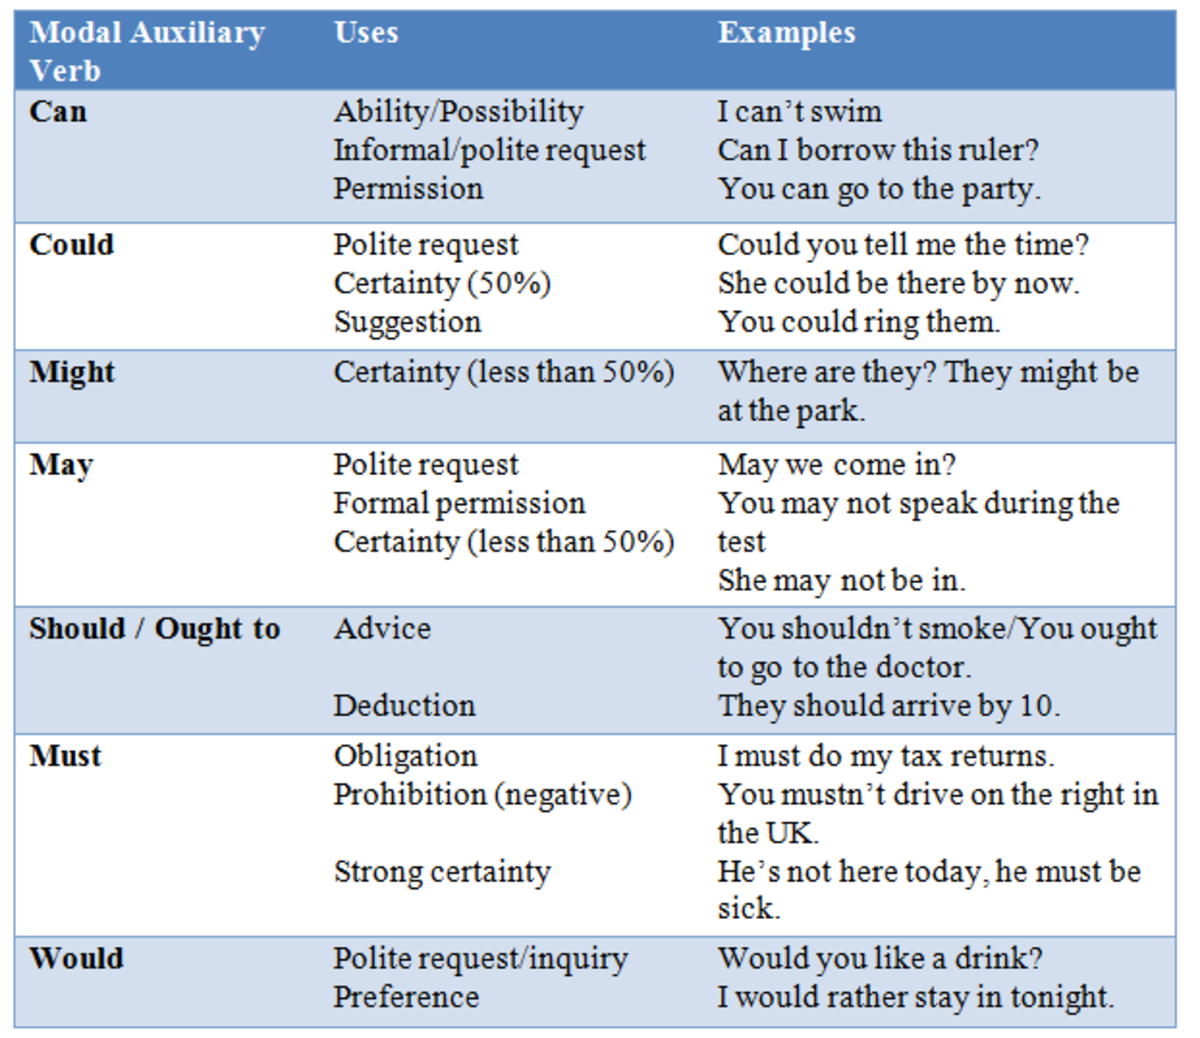 *Note some modal auxiliary verbs have a specific use in the past, but I have not included them in this chart.